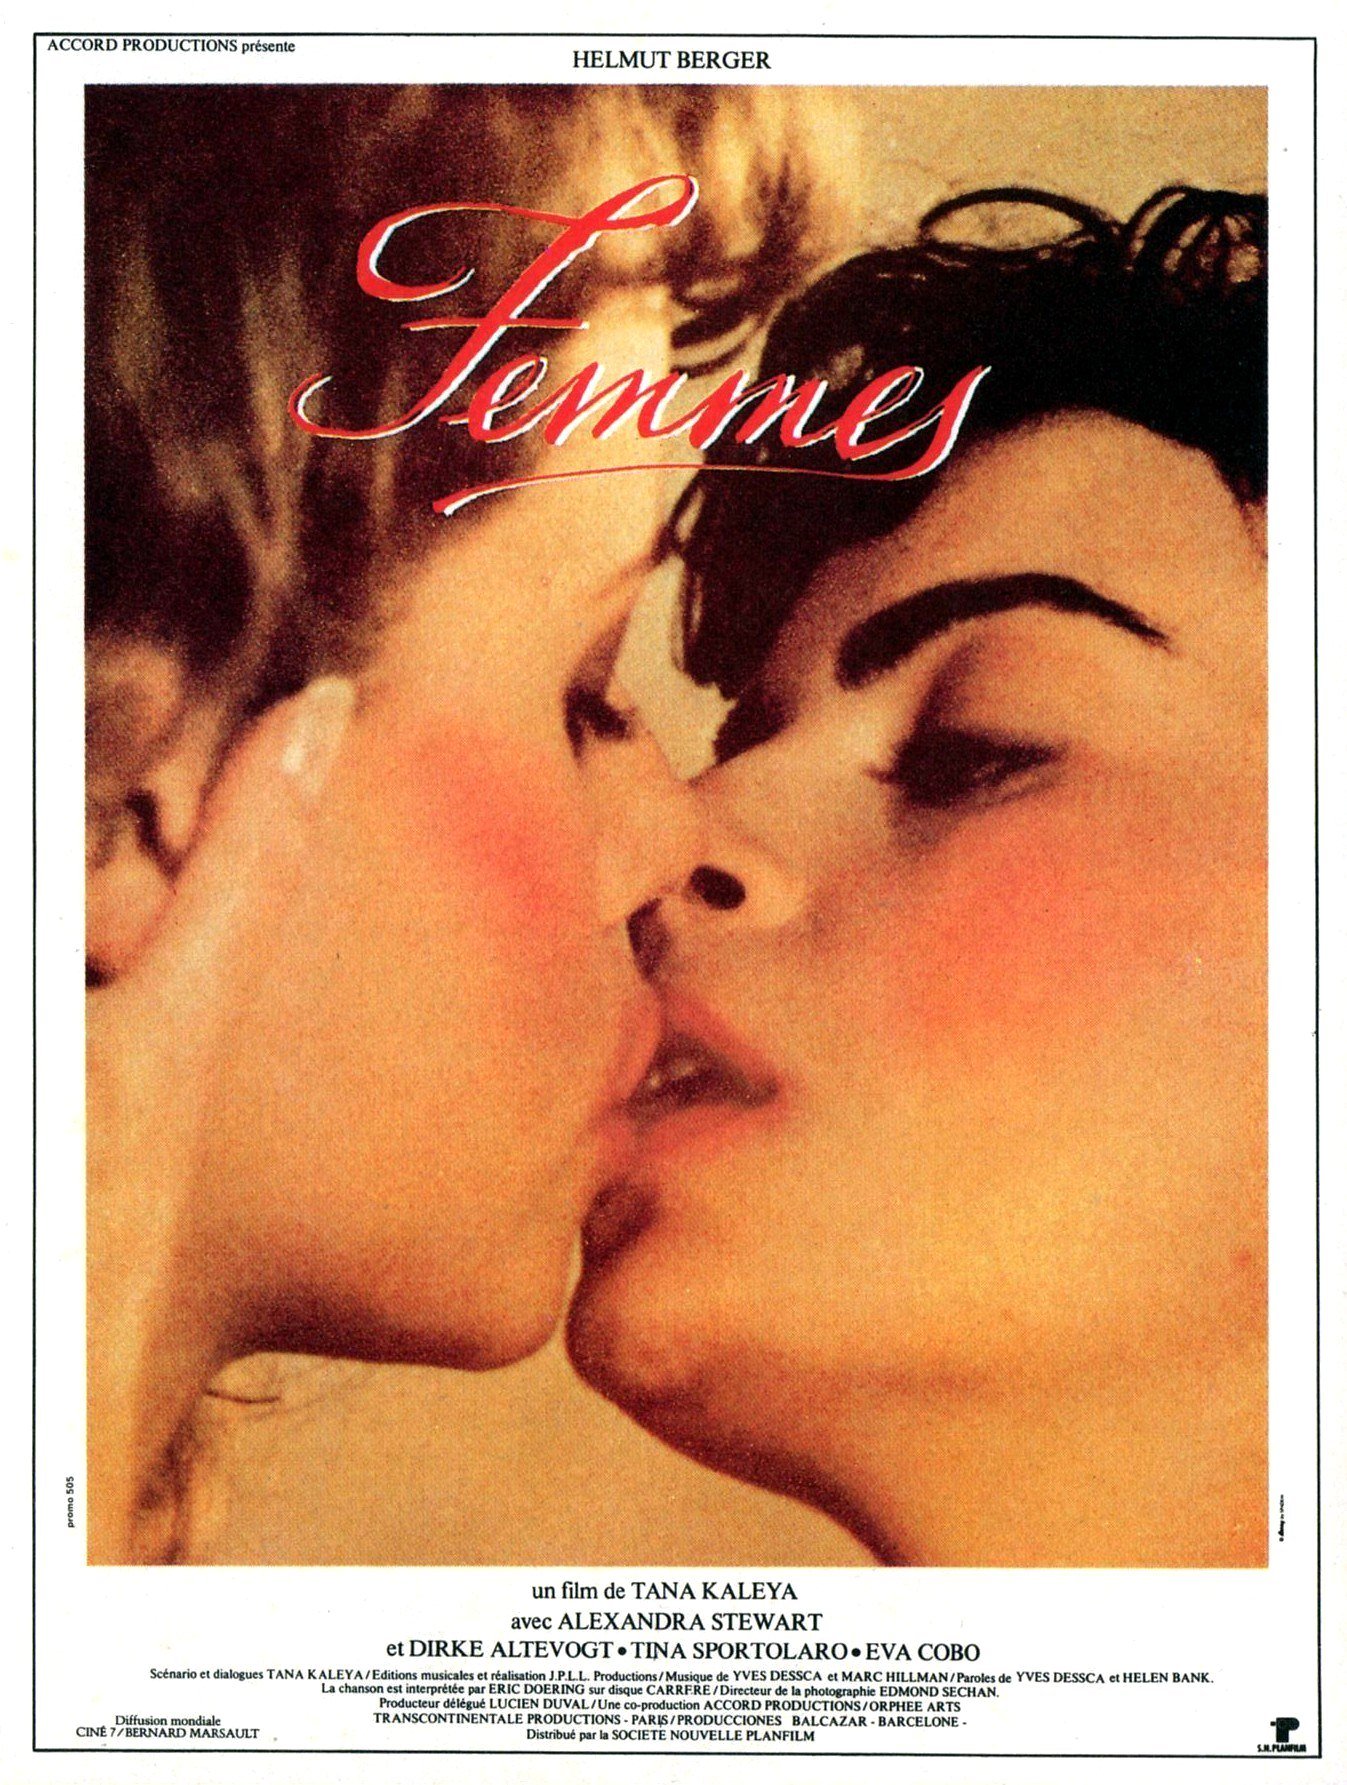 Femmes (1983) with English Subtitles on DVD on DVD